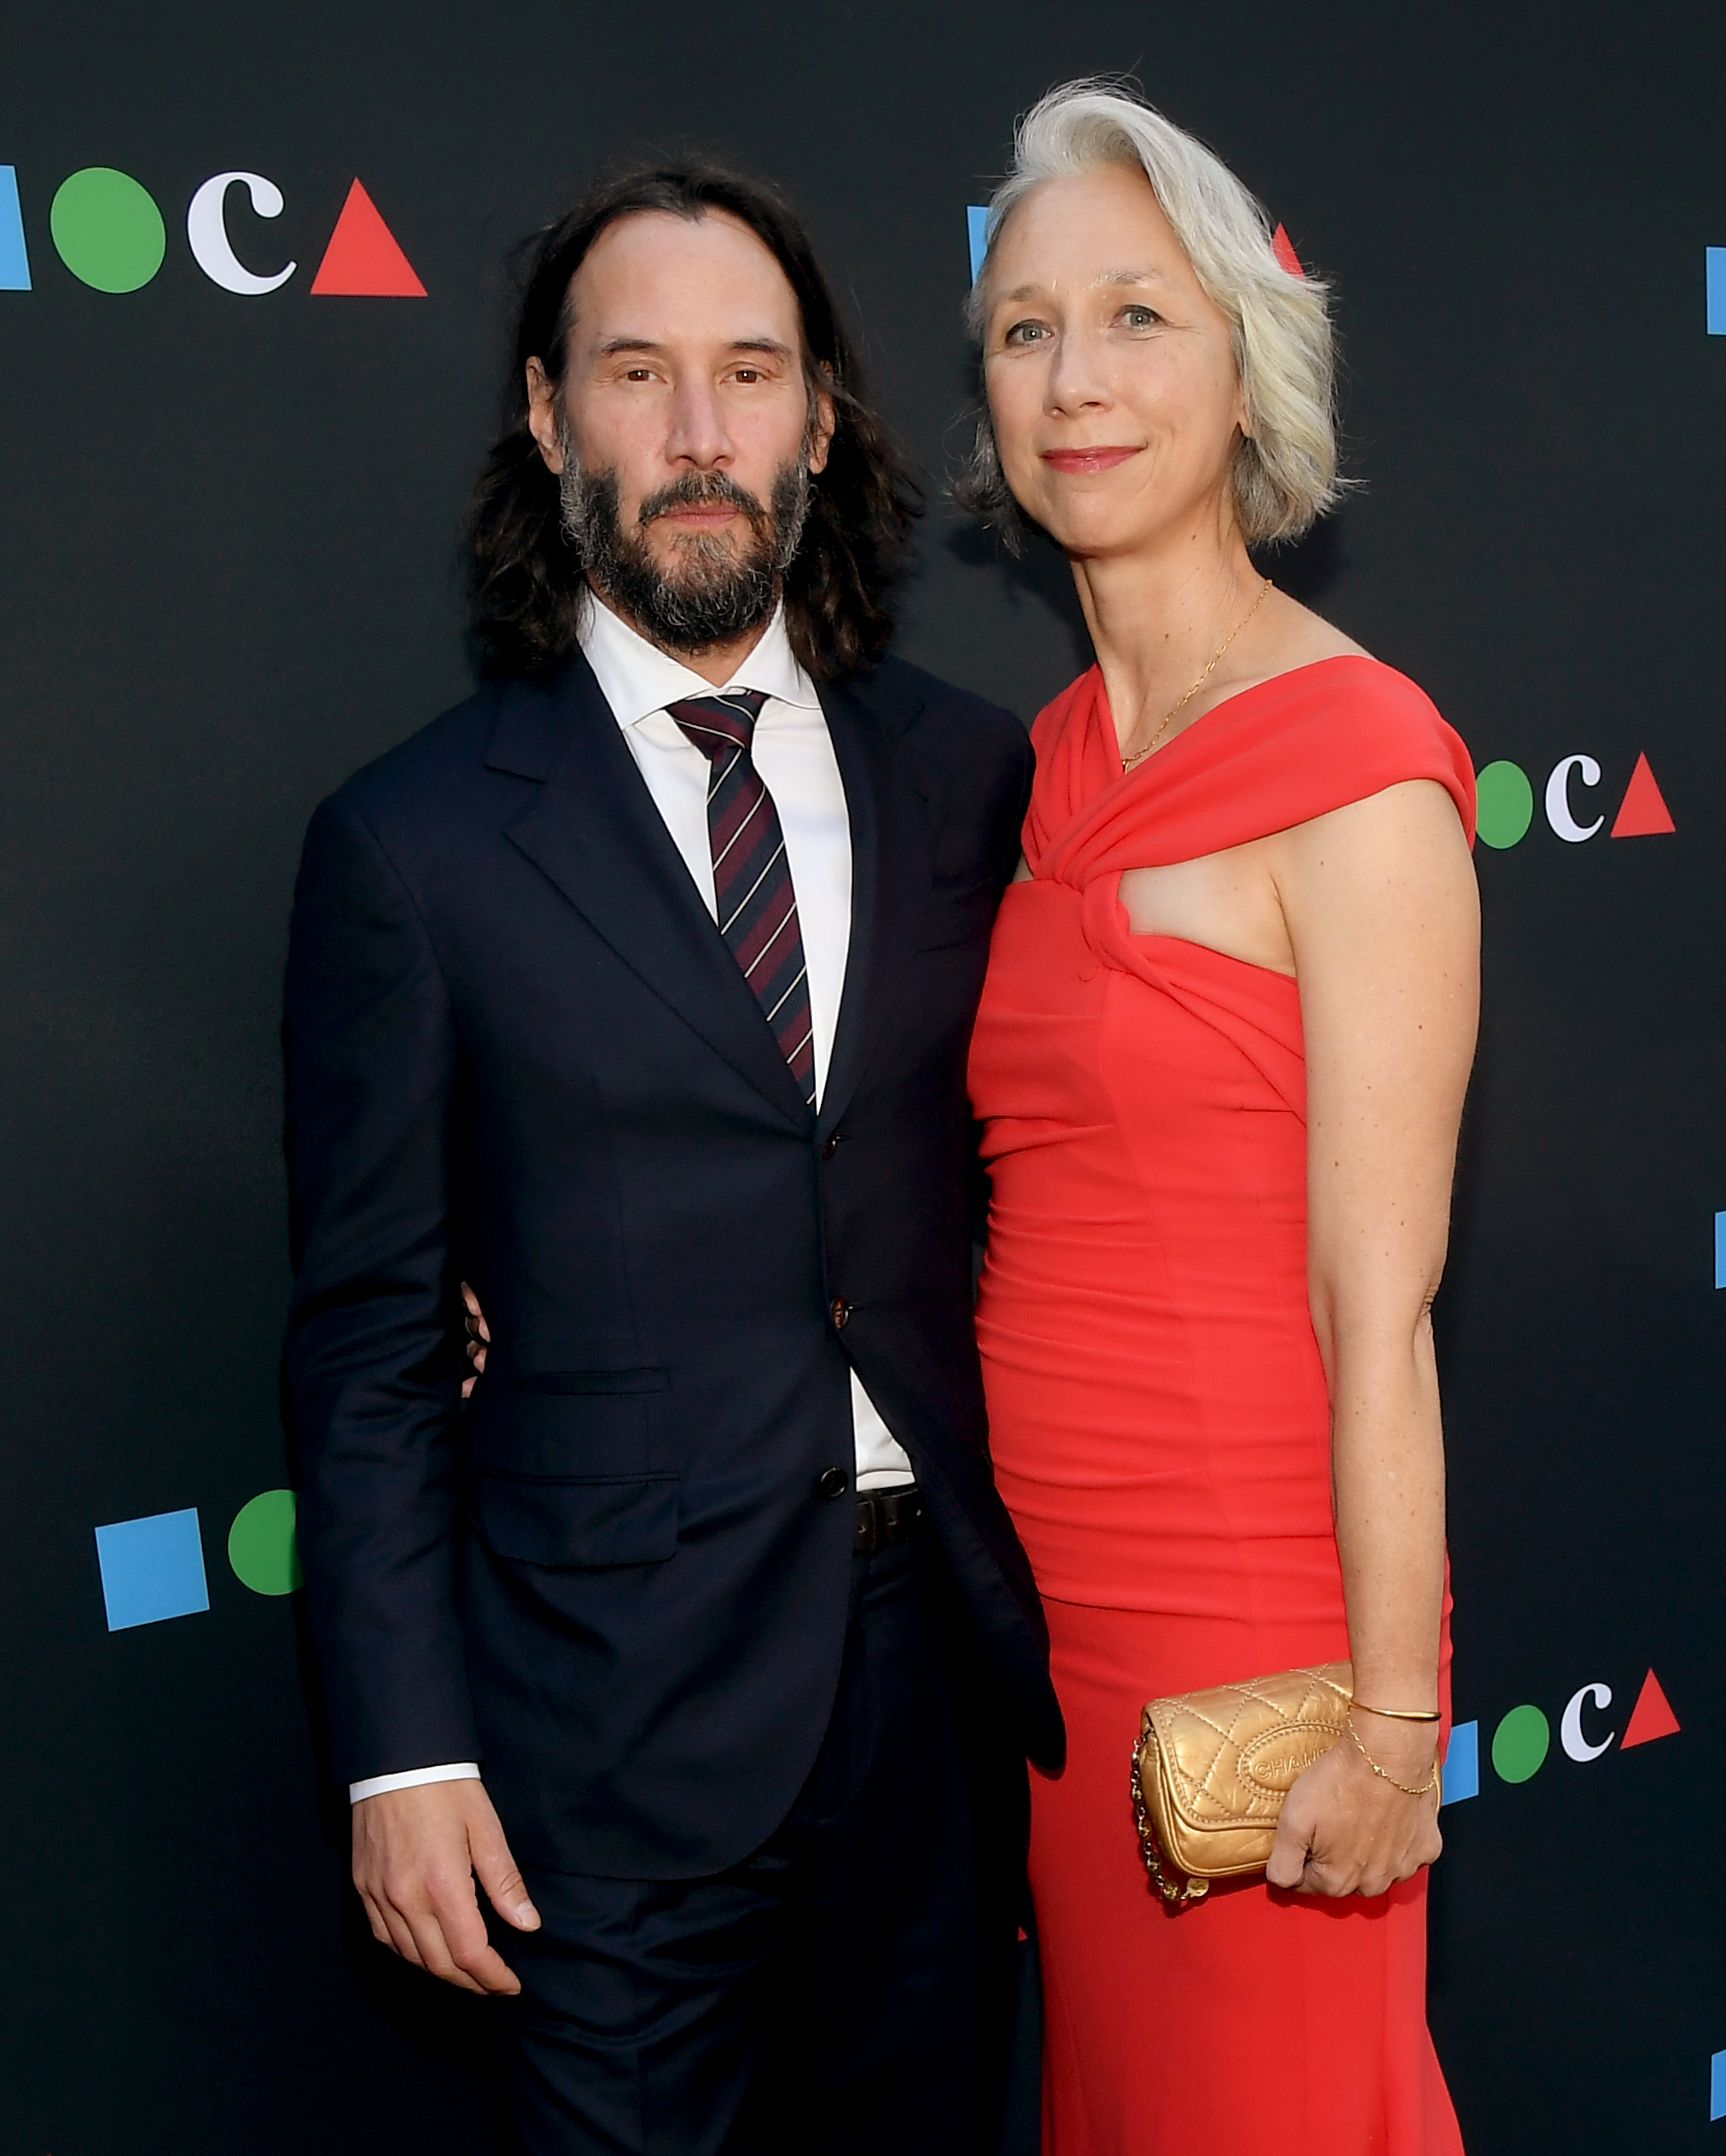 Keanu Reeves and Alexandra Grant attend the MOCA Gala 2022 at The Geffen Contemporary at MOCA in Los Angeles, California, on June 4, 2022. | Source: Getty Images